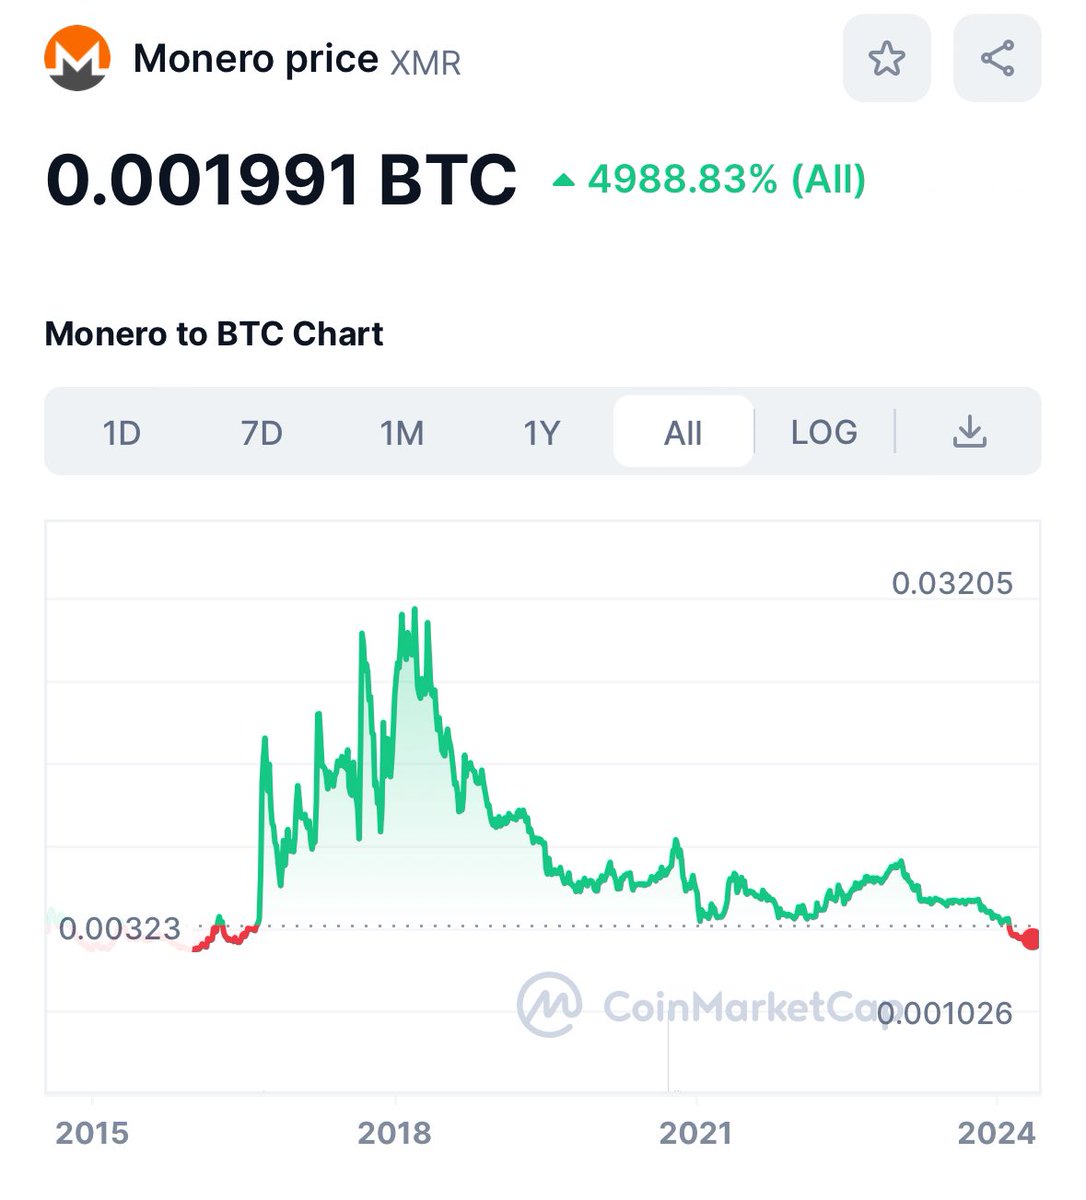 Monero is now at levels last seen in 2016. A prime example of the fact that shitcoins can’t compete with bitcoin as a store of value (and thus money), even if they have a real utility. For better or worse, bitcoin is our only shot at separating money and state.